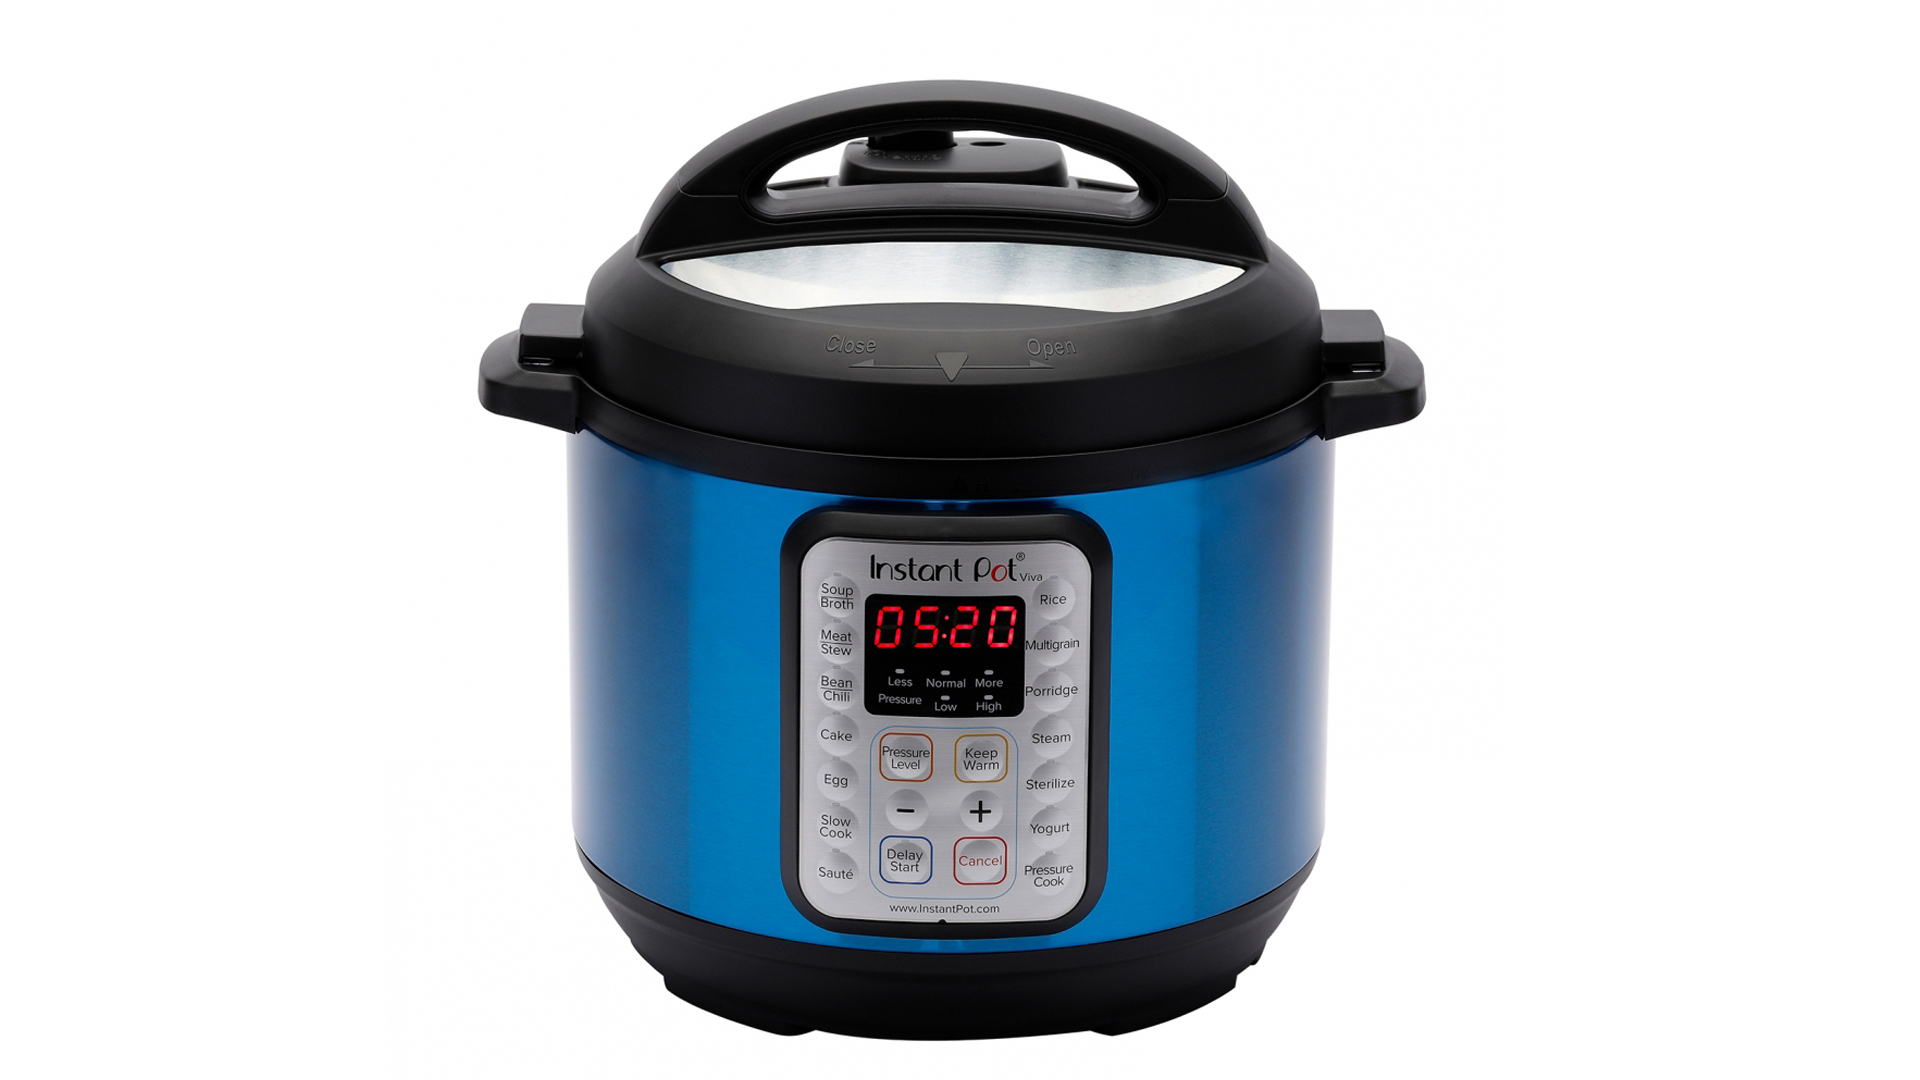 My product review: Instant Pot Viva 